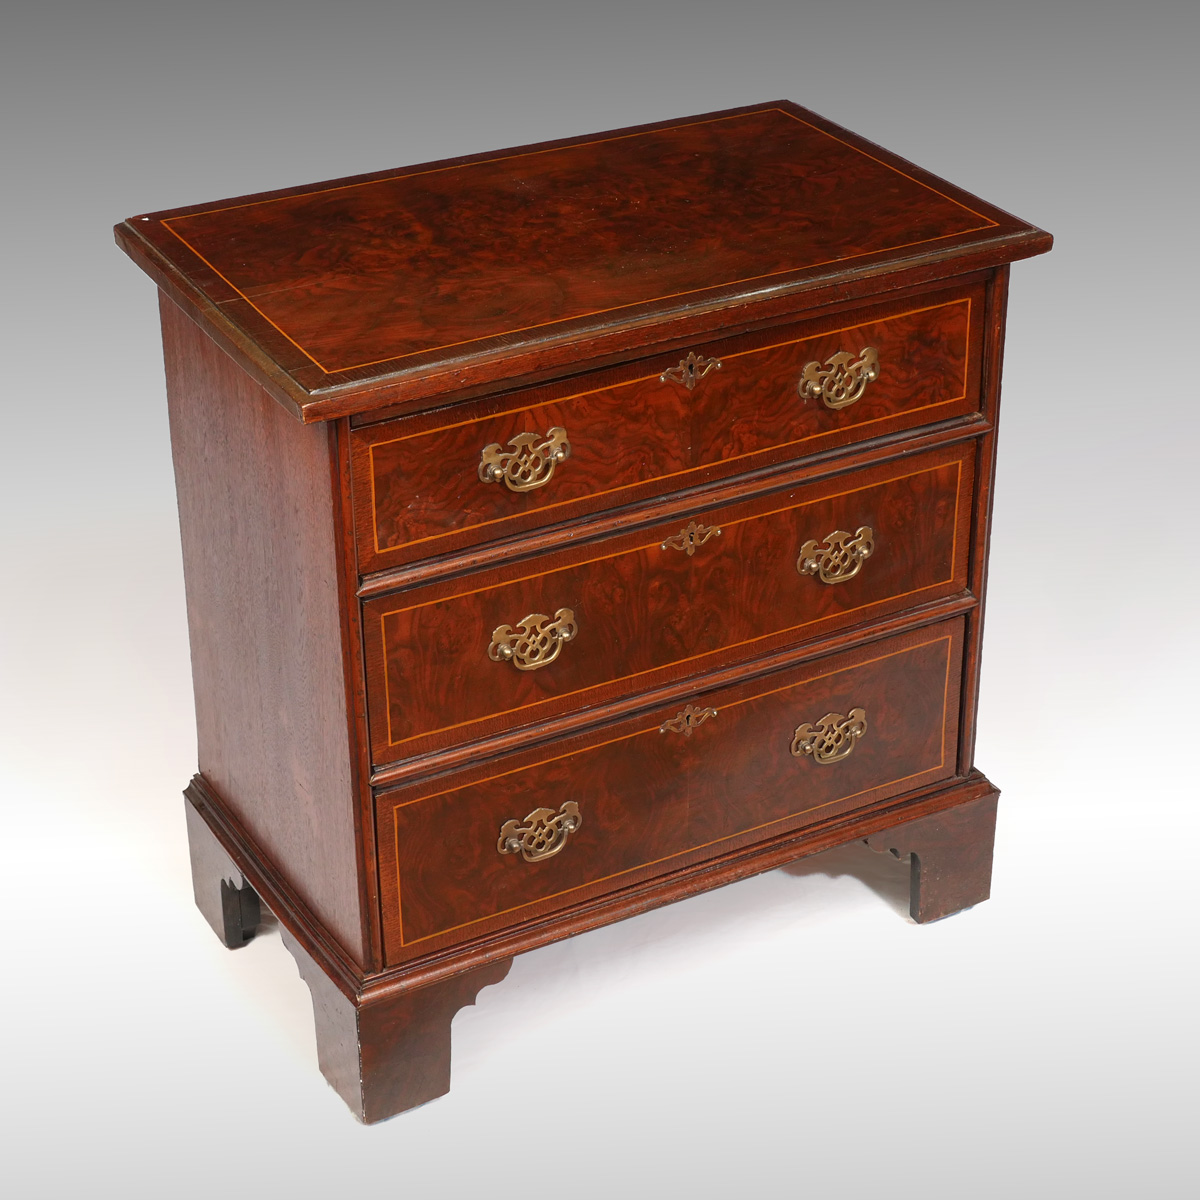 SMALL 19TH C. 3 DRAWER CHEST: 3-